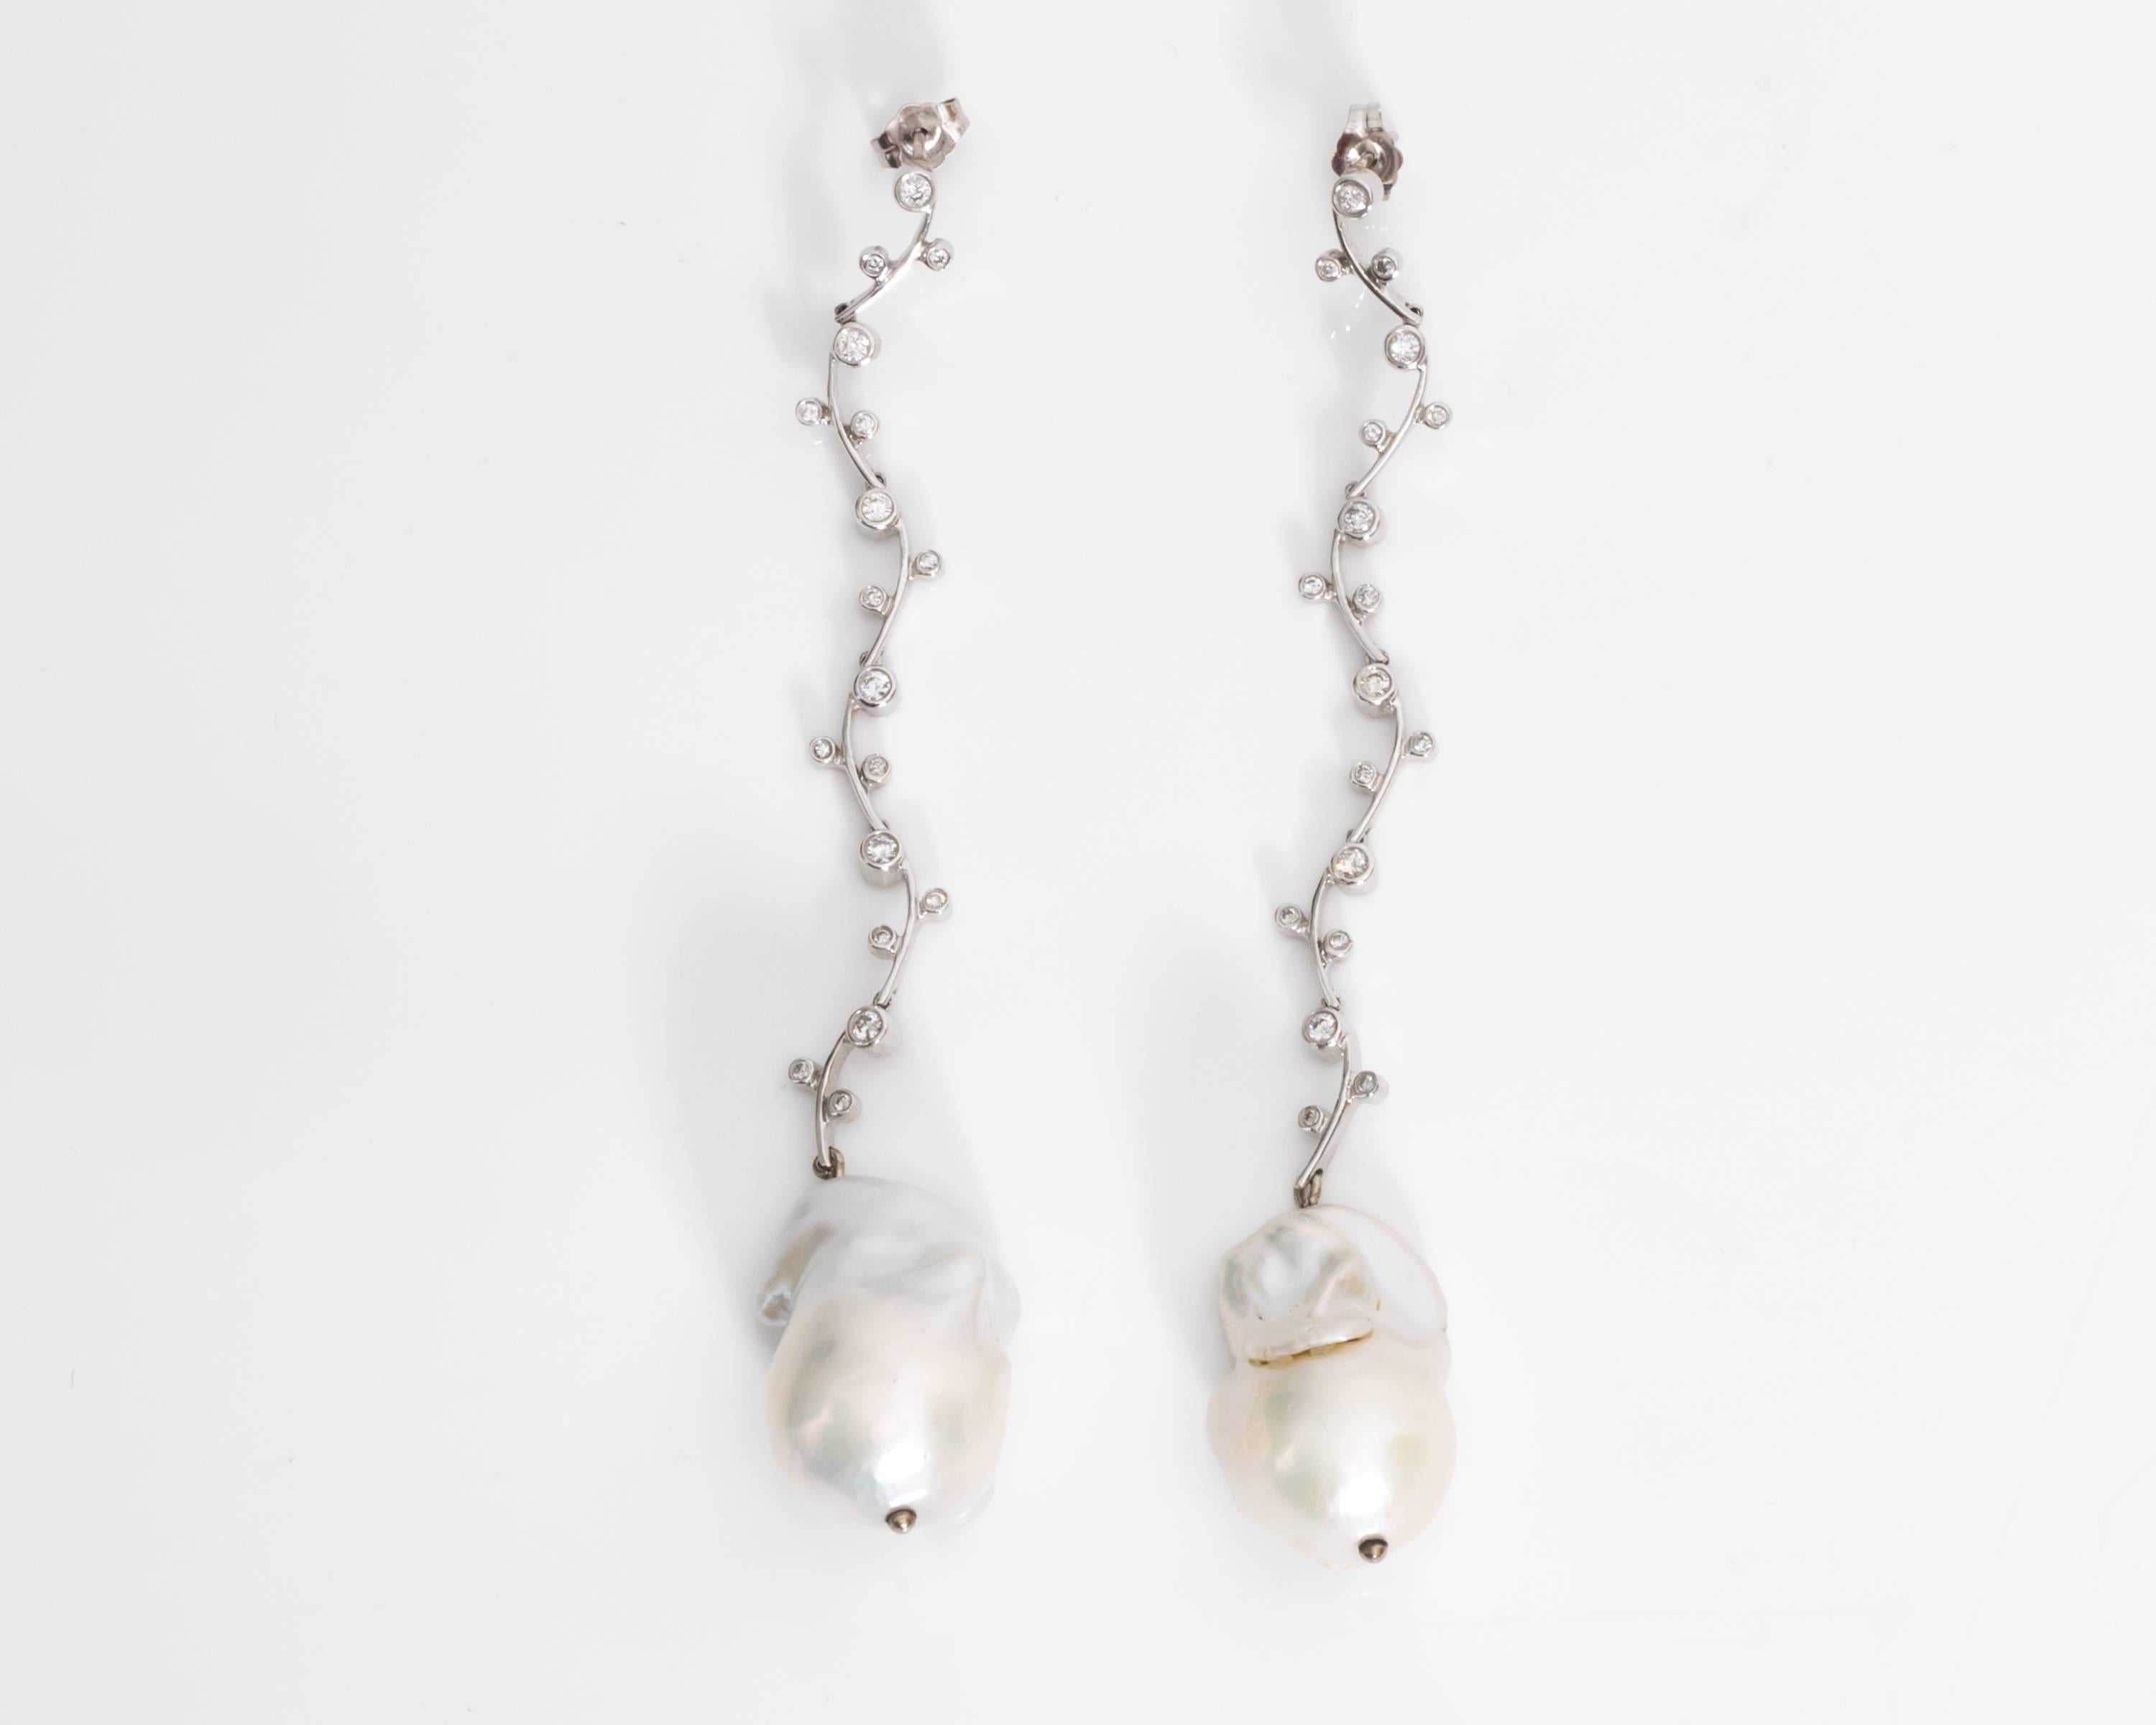 Free-Form Natural Pearl and Diamond Earrings
Dangling Earrings with Flexible Featured Drops
Diamonds are G color, VS clarity, 0.25 carats total 
Push Back Locking Mechanism 
Beautifully Crafted in 14 Karat White Gold with Intricate Floral Vine